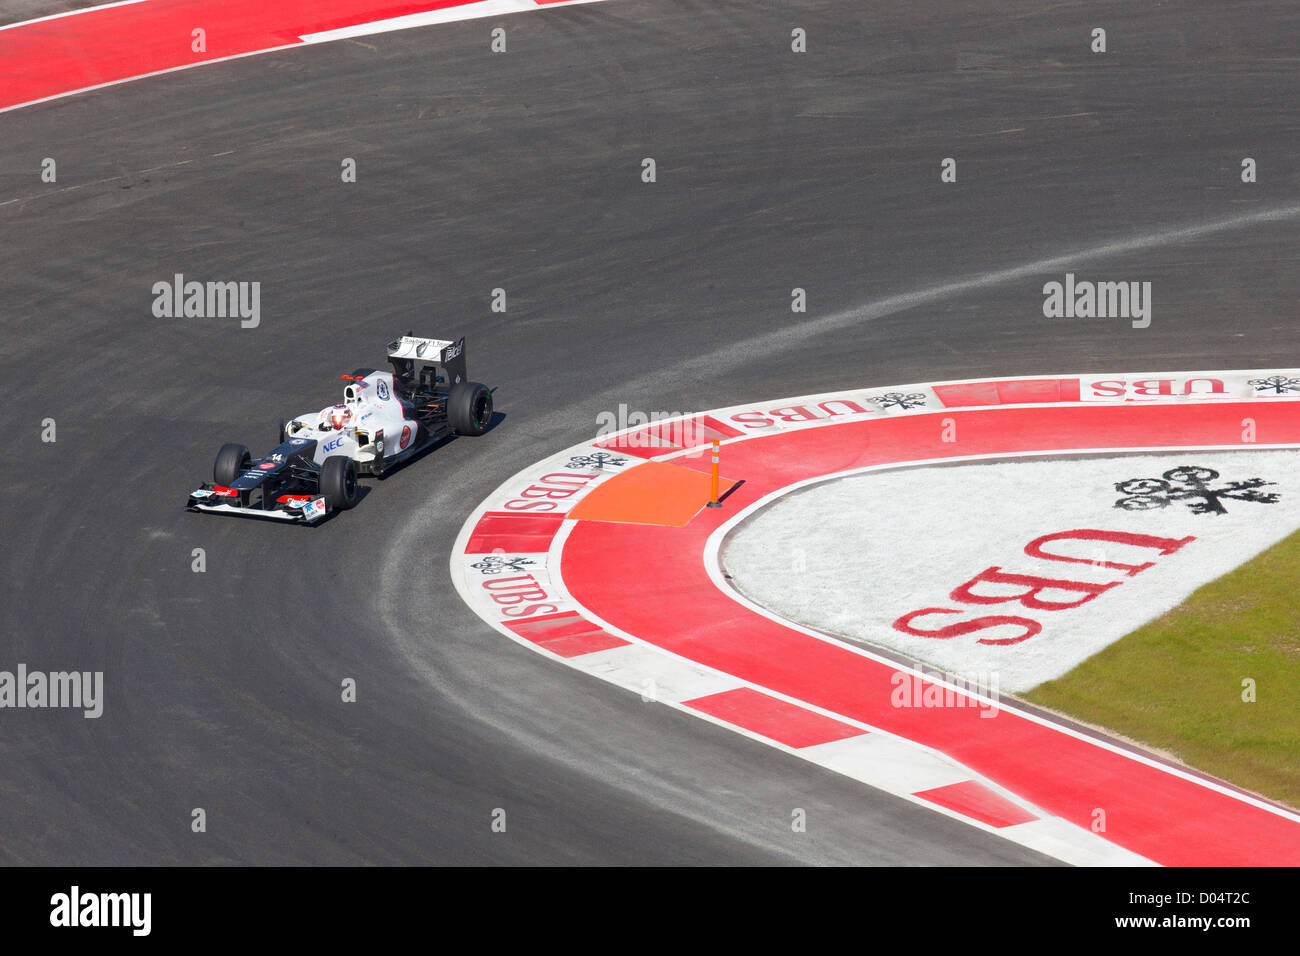 Kamui Kobayashi in the Sauber F1 car during practice for the Formula One United States Grand Prix at Circuit of the Americas Stock Photo